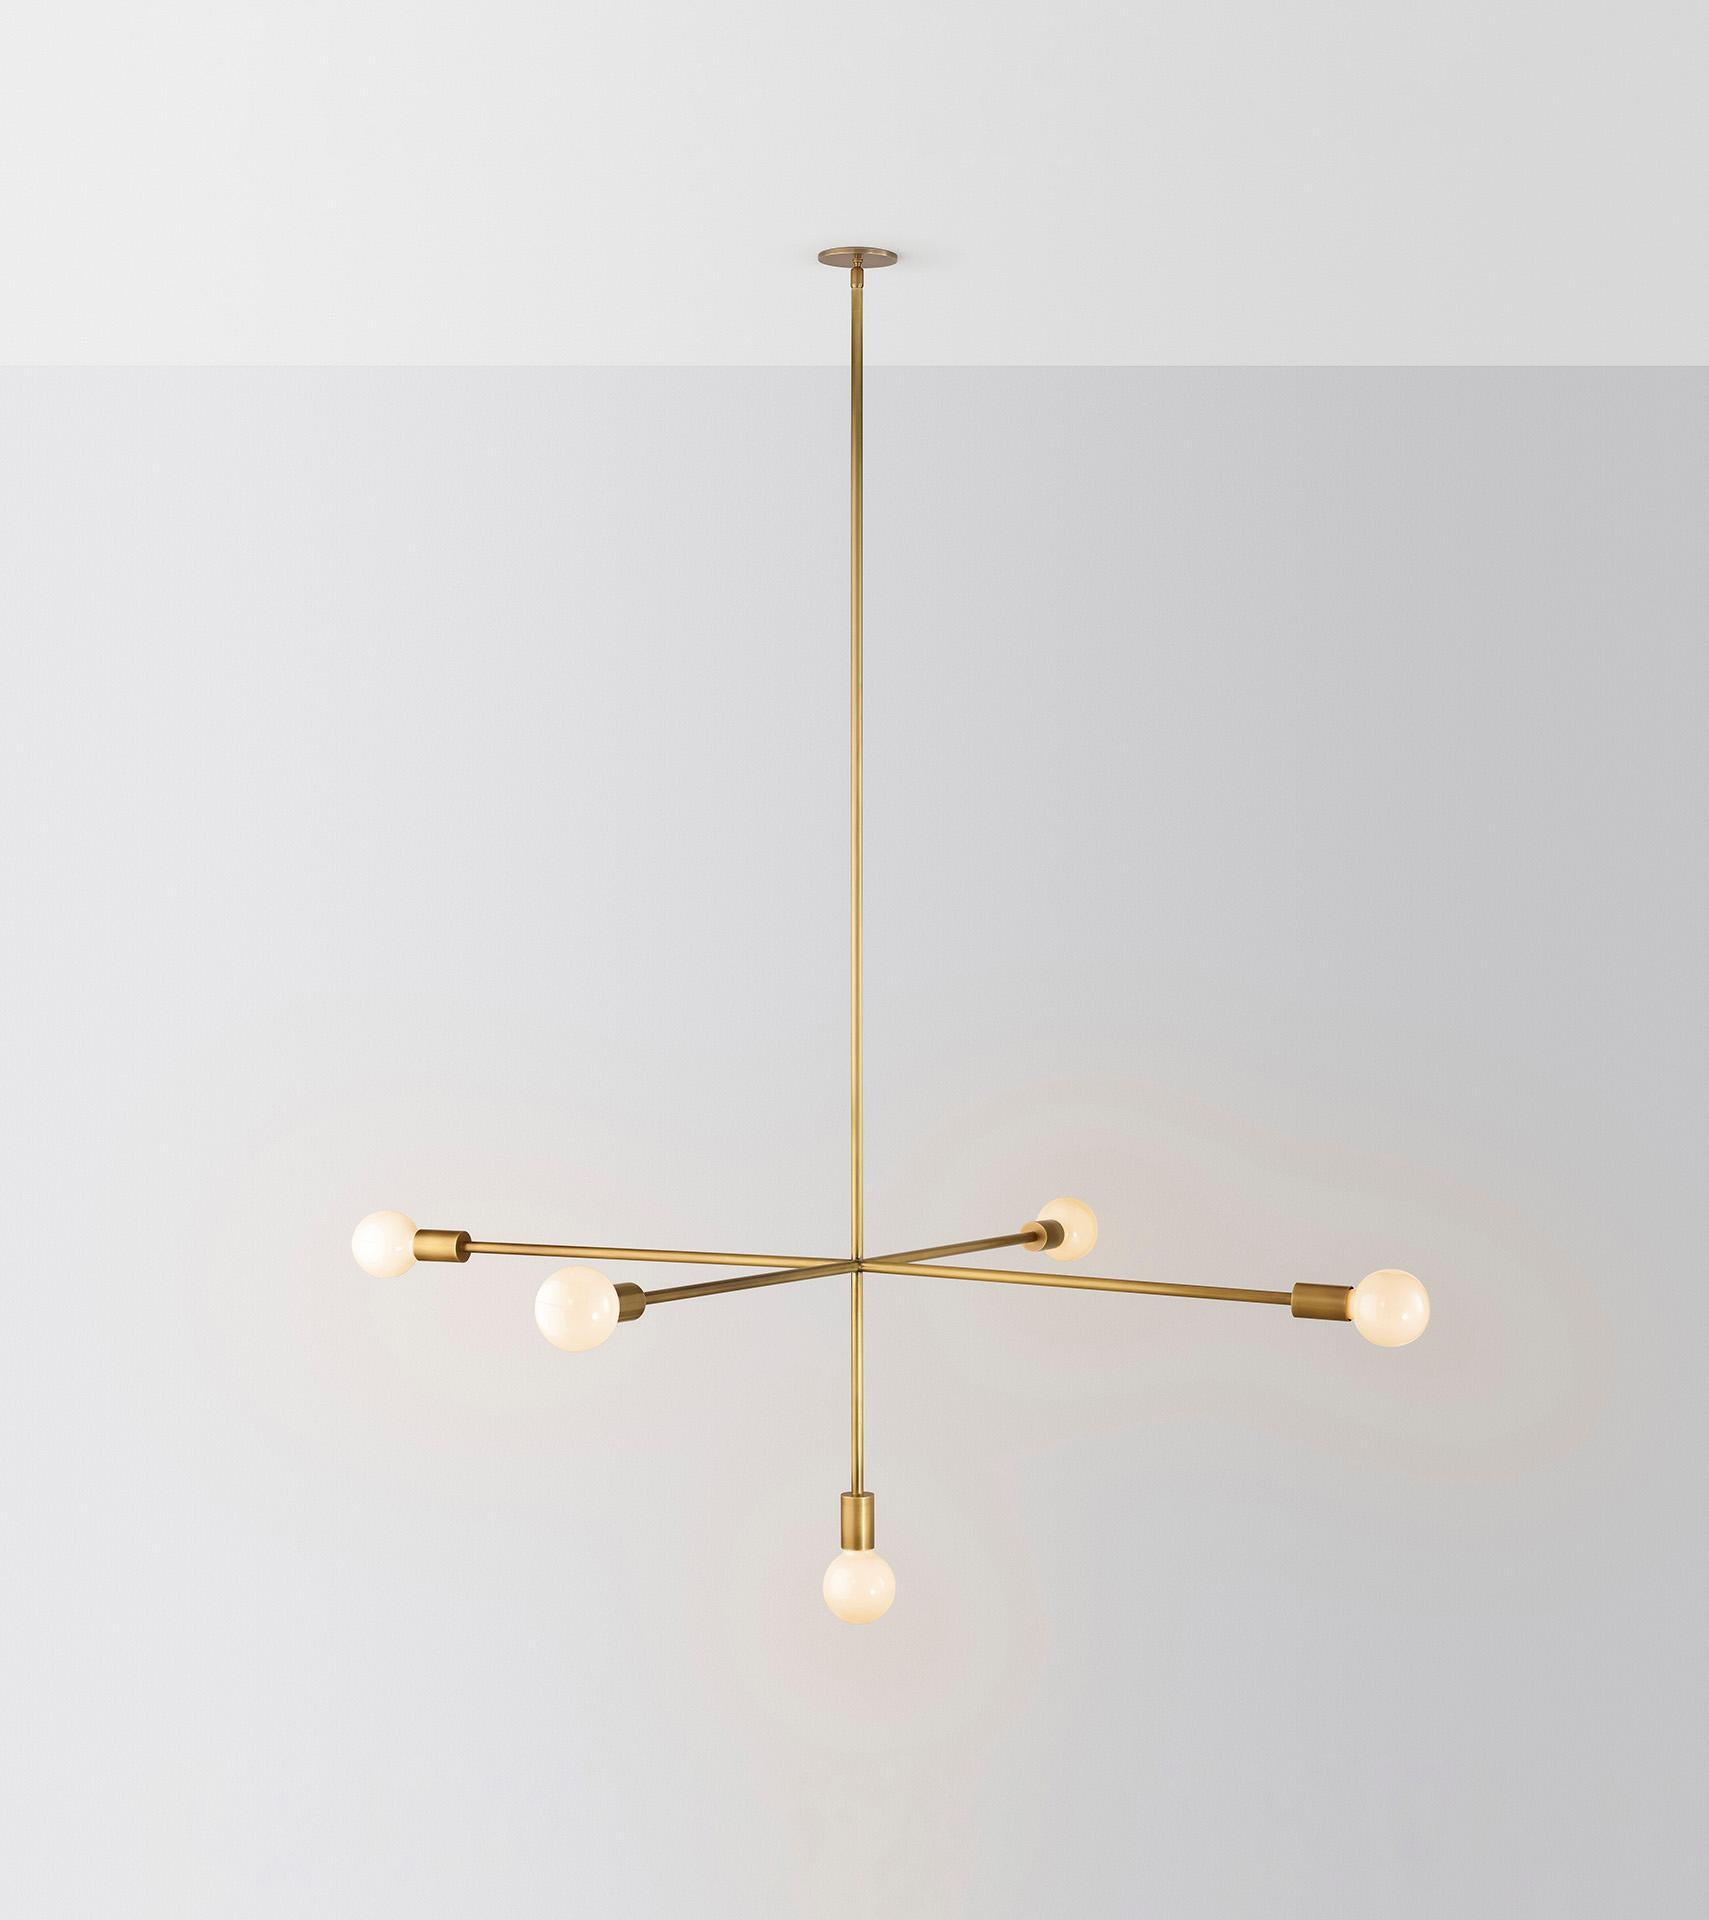 Cross kick high by Volker Haug
Dimensions: W 133 x D 133 x H 92
Materials: Brass

Lamp: Opal G95 LED (E26/E27 110 - 240V)
Suspension: (as specified, minimum 620 mm)
12V version available (110V - 240V driver)

Volker Haug Studio is an